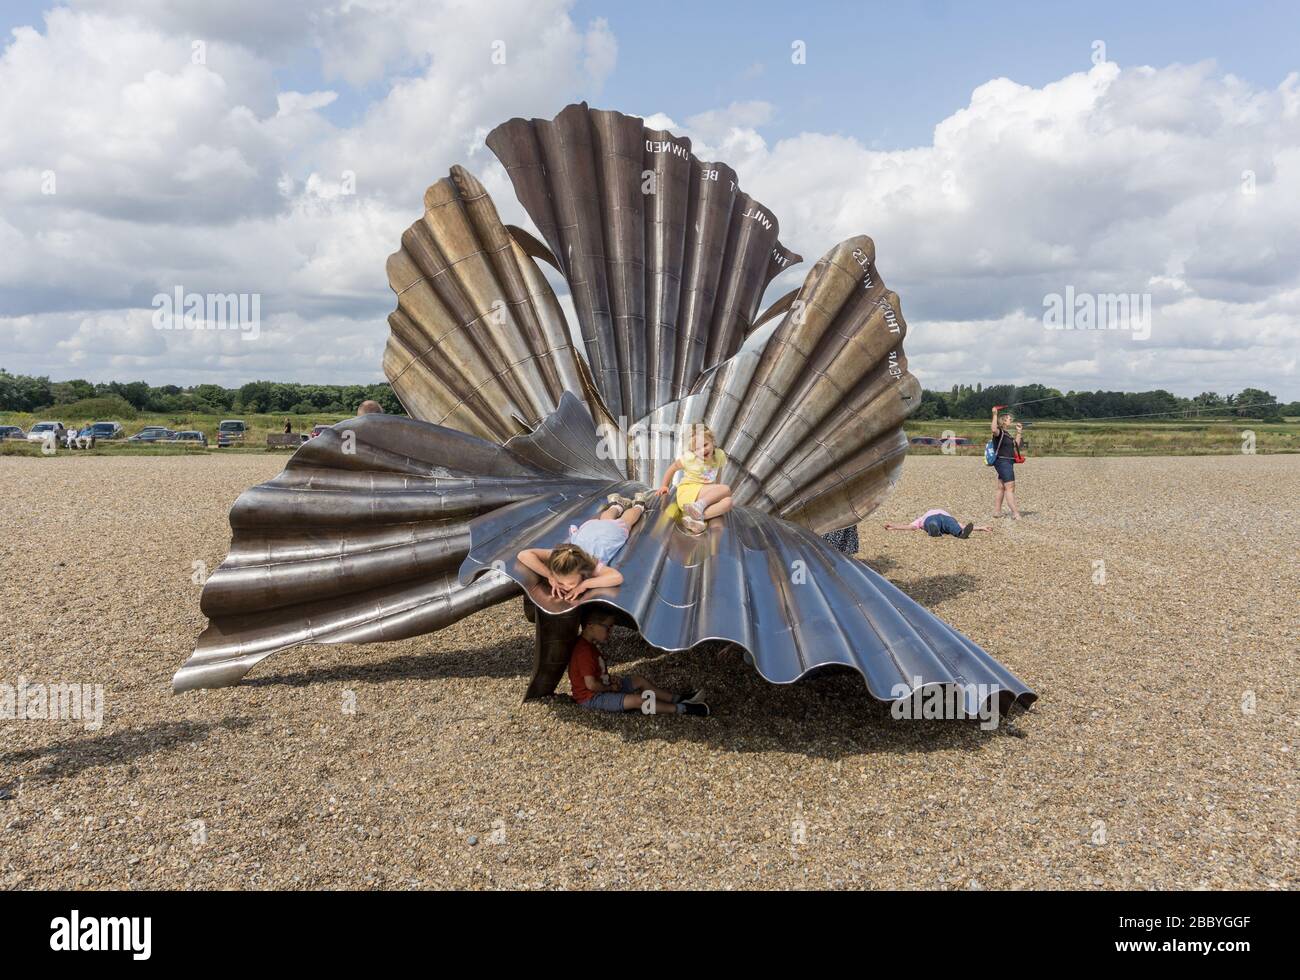 Children playing on the Scallop sculpture on Aldeburgh Beach, Suffolk, UK; 2003 by Maggi Hamblin and dedicated to the composer Benjamin Britten Stock Photo